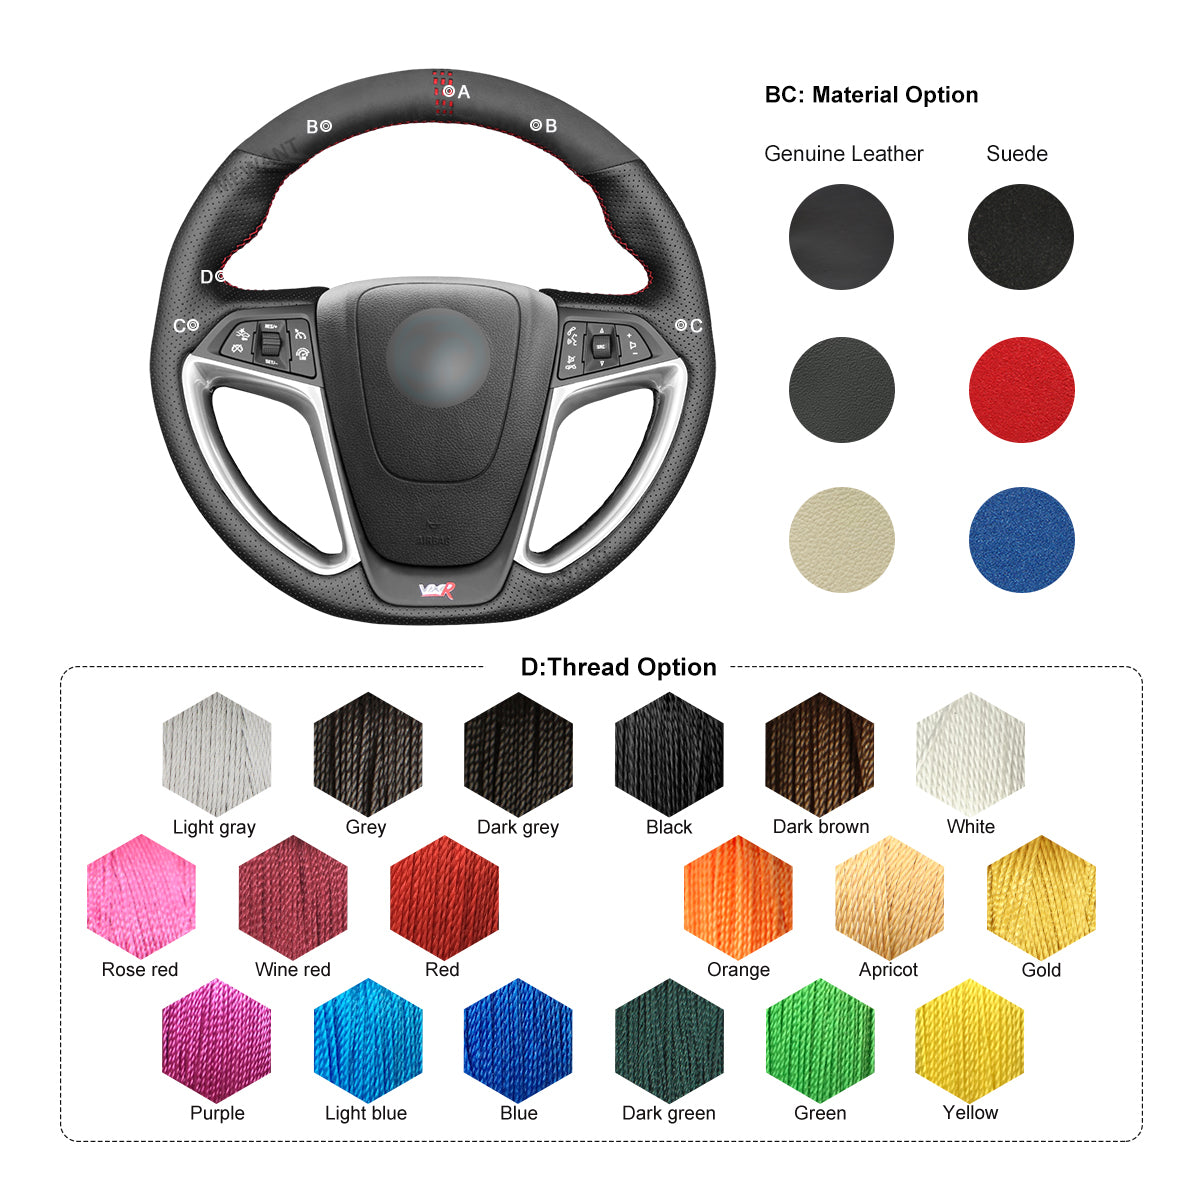 MEWANT Black Carbon Fiber Suede Leather Car Steering Wheel Cover for Opel Astra GTC OPC Vauxhall Astra GTC VXR Holden Astra VXR